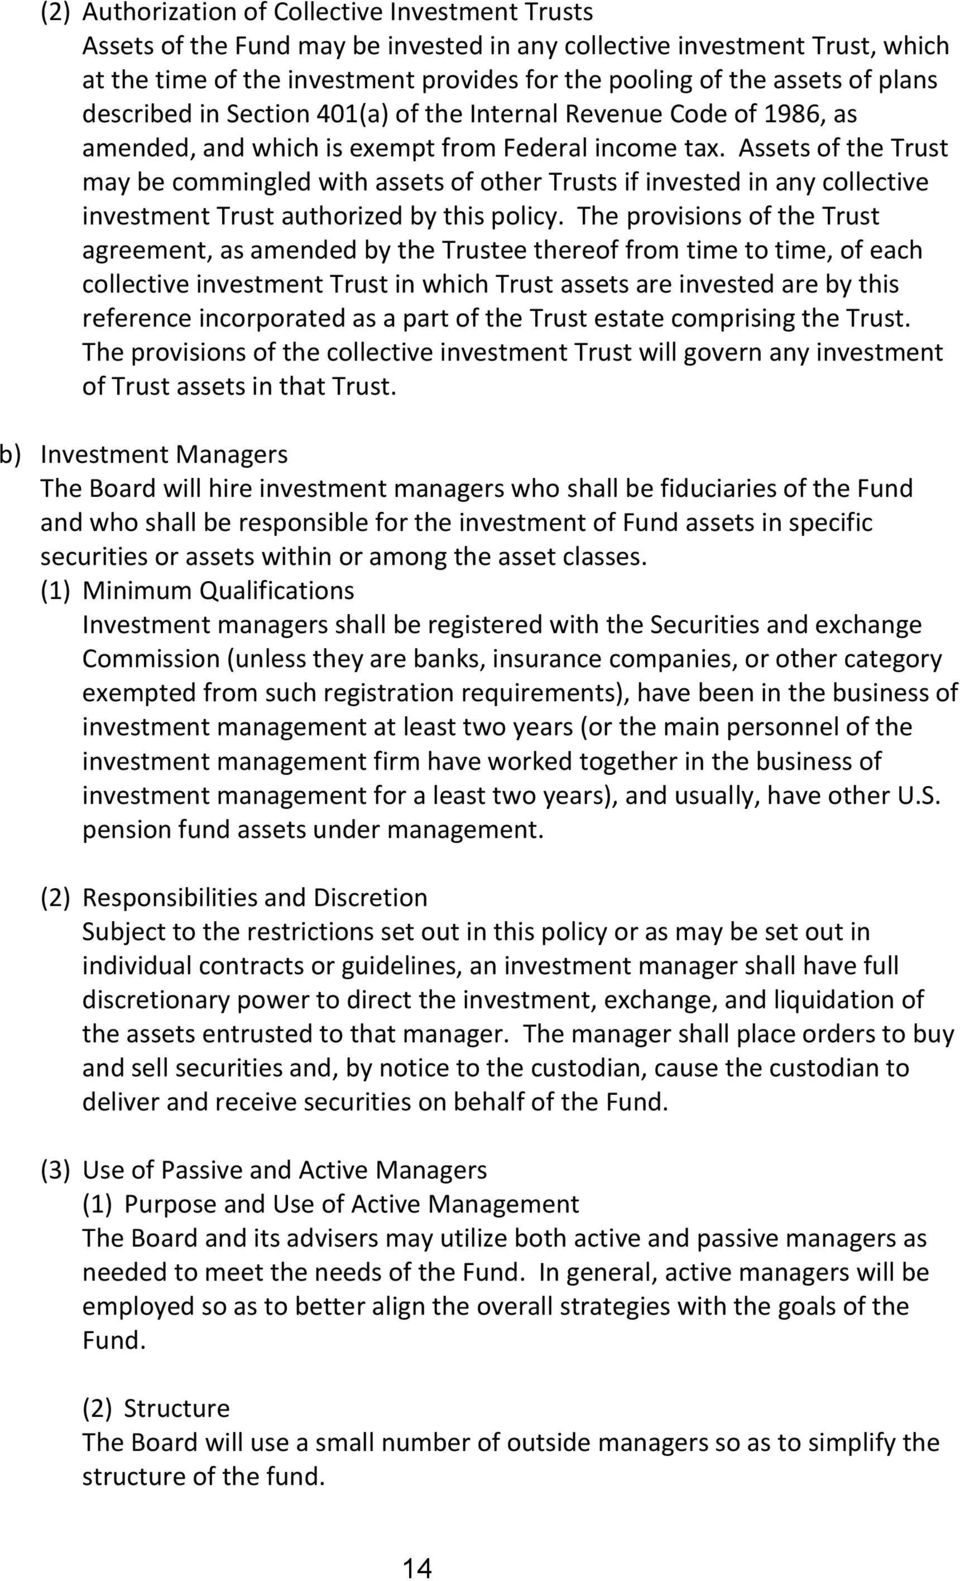 Assets of the Trust may be commingled with assets of other Trusts if invested in any collective investment Trust authorized by this policy.